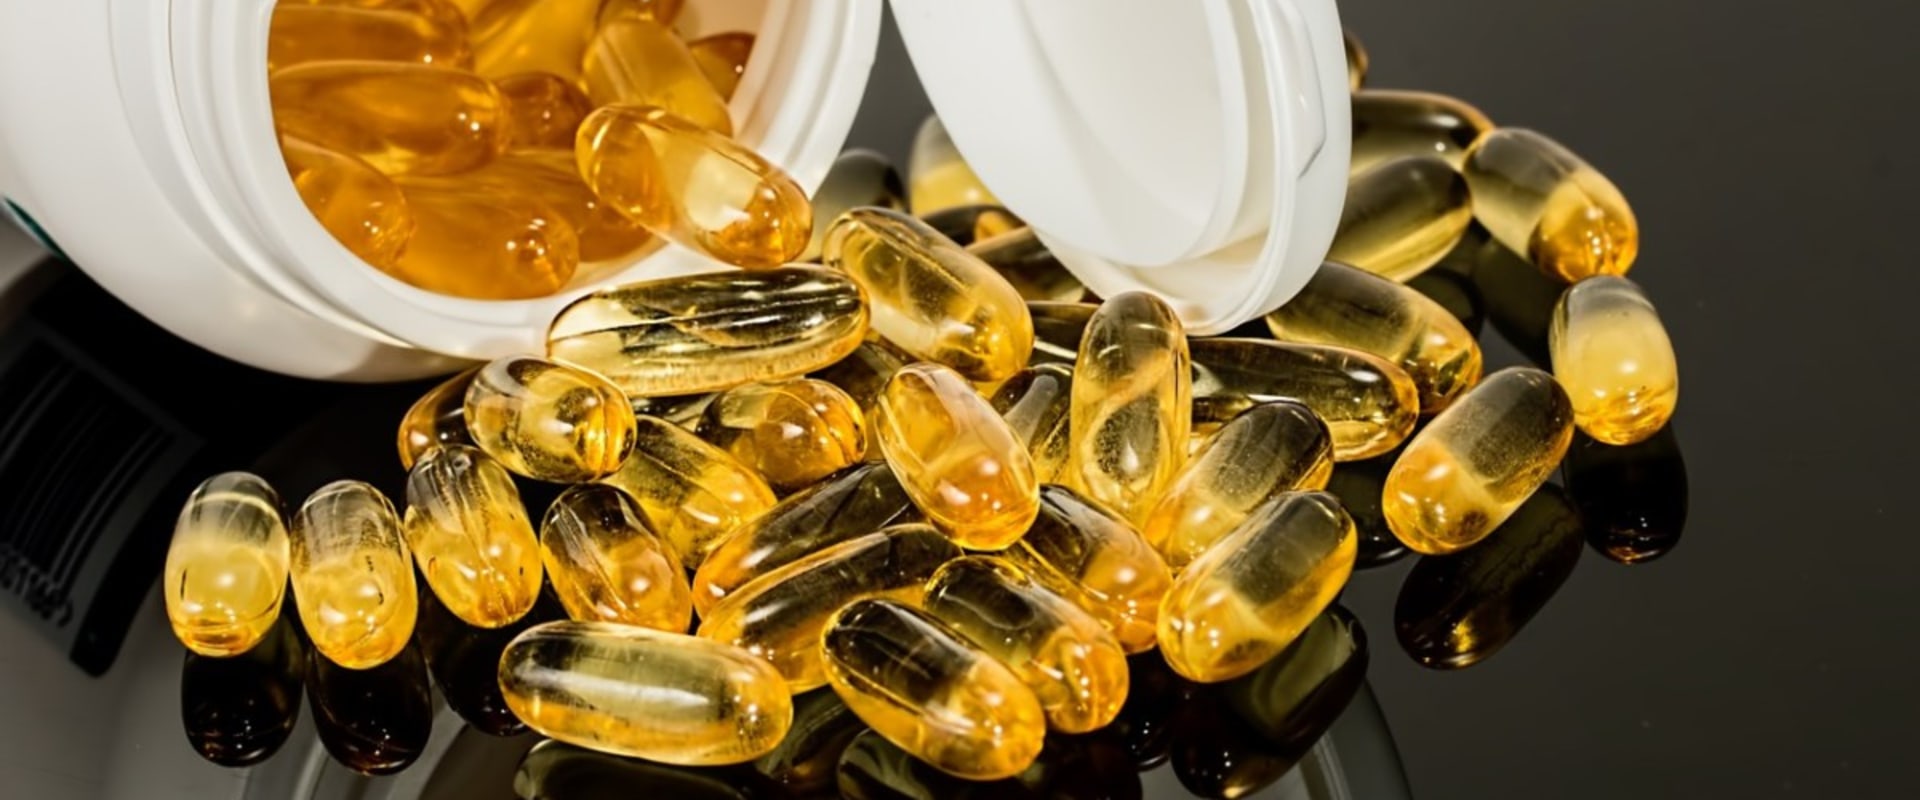 What regulations are there for supplements?